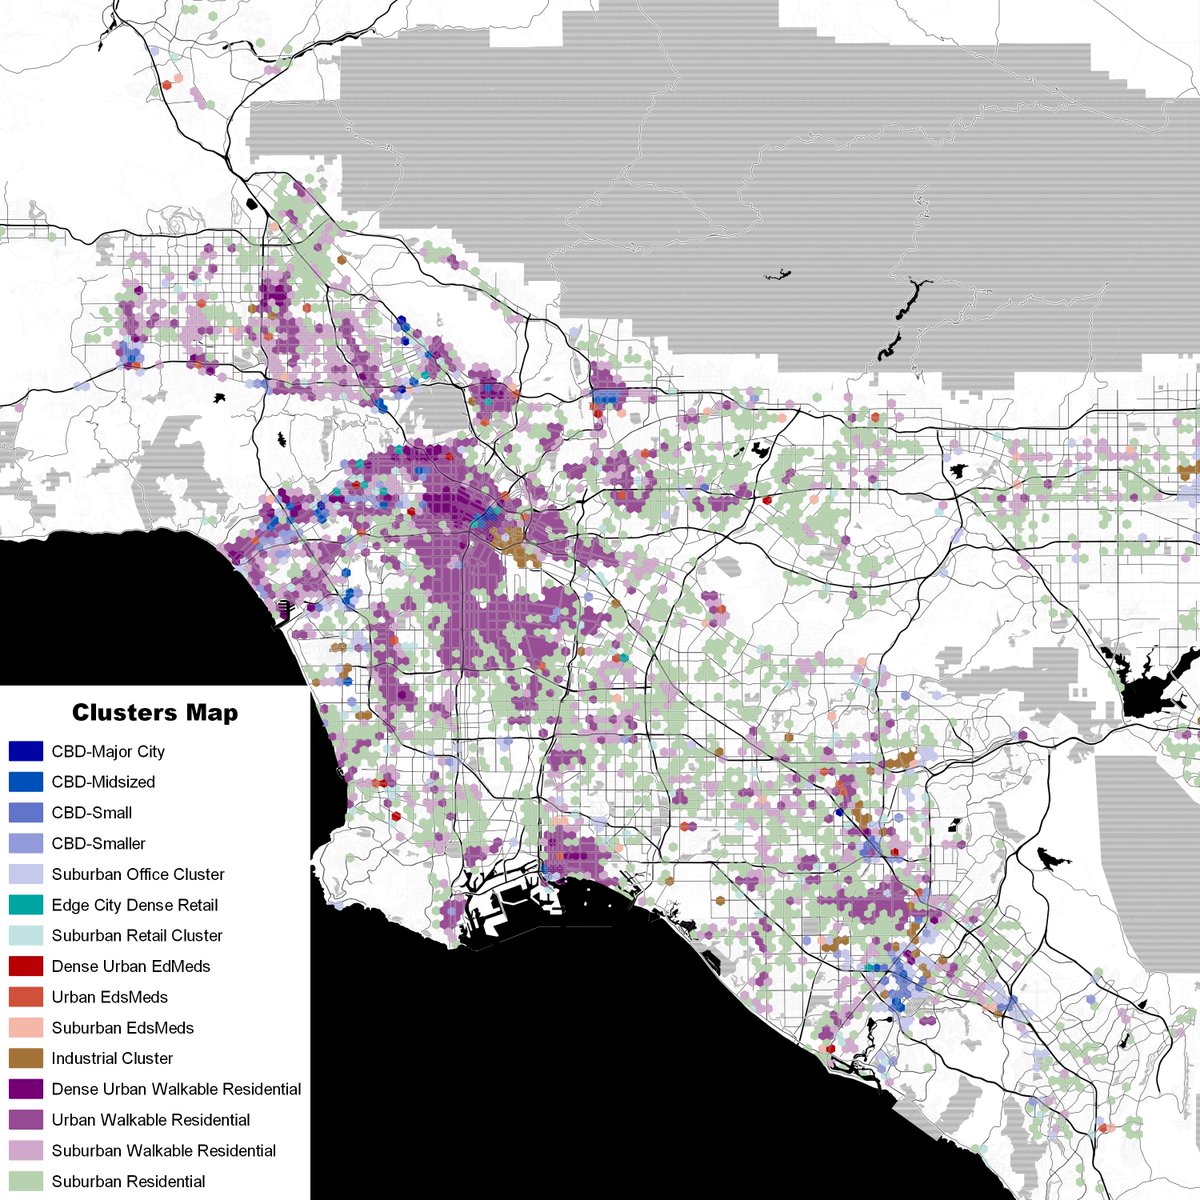 There is a lot of Los Angeles, too, but it's a lot less-organized, has much less dense commercial core, and is less continuously at urban densities (which I define as 10,000 activity units per square mile).